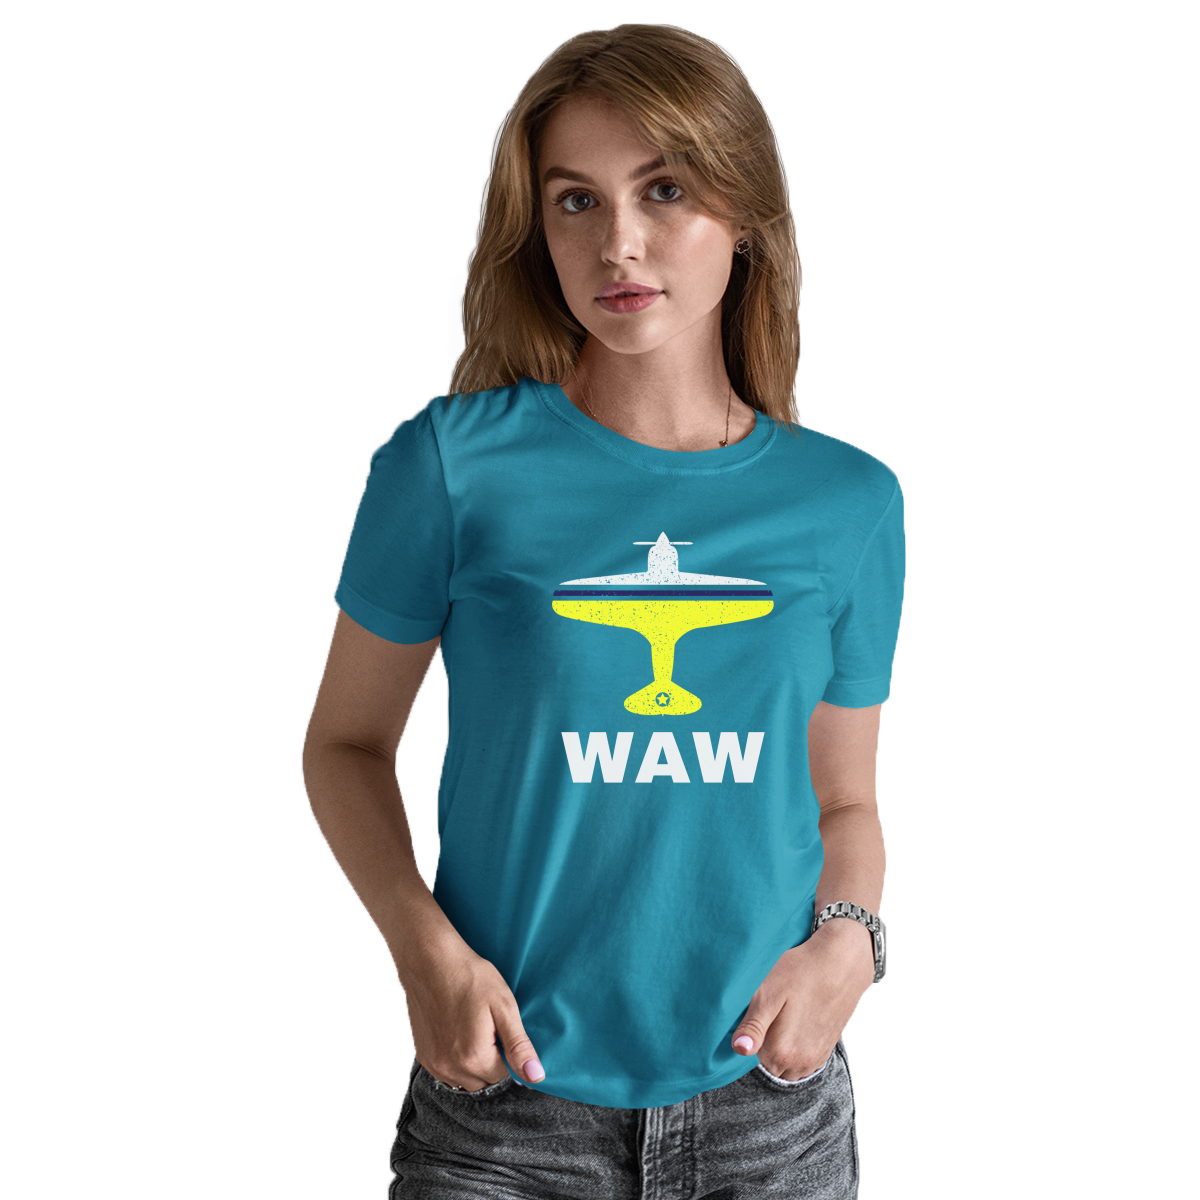 Fly Warsaw WAW Airport Women's T-shirt | Turquoise